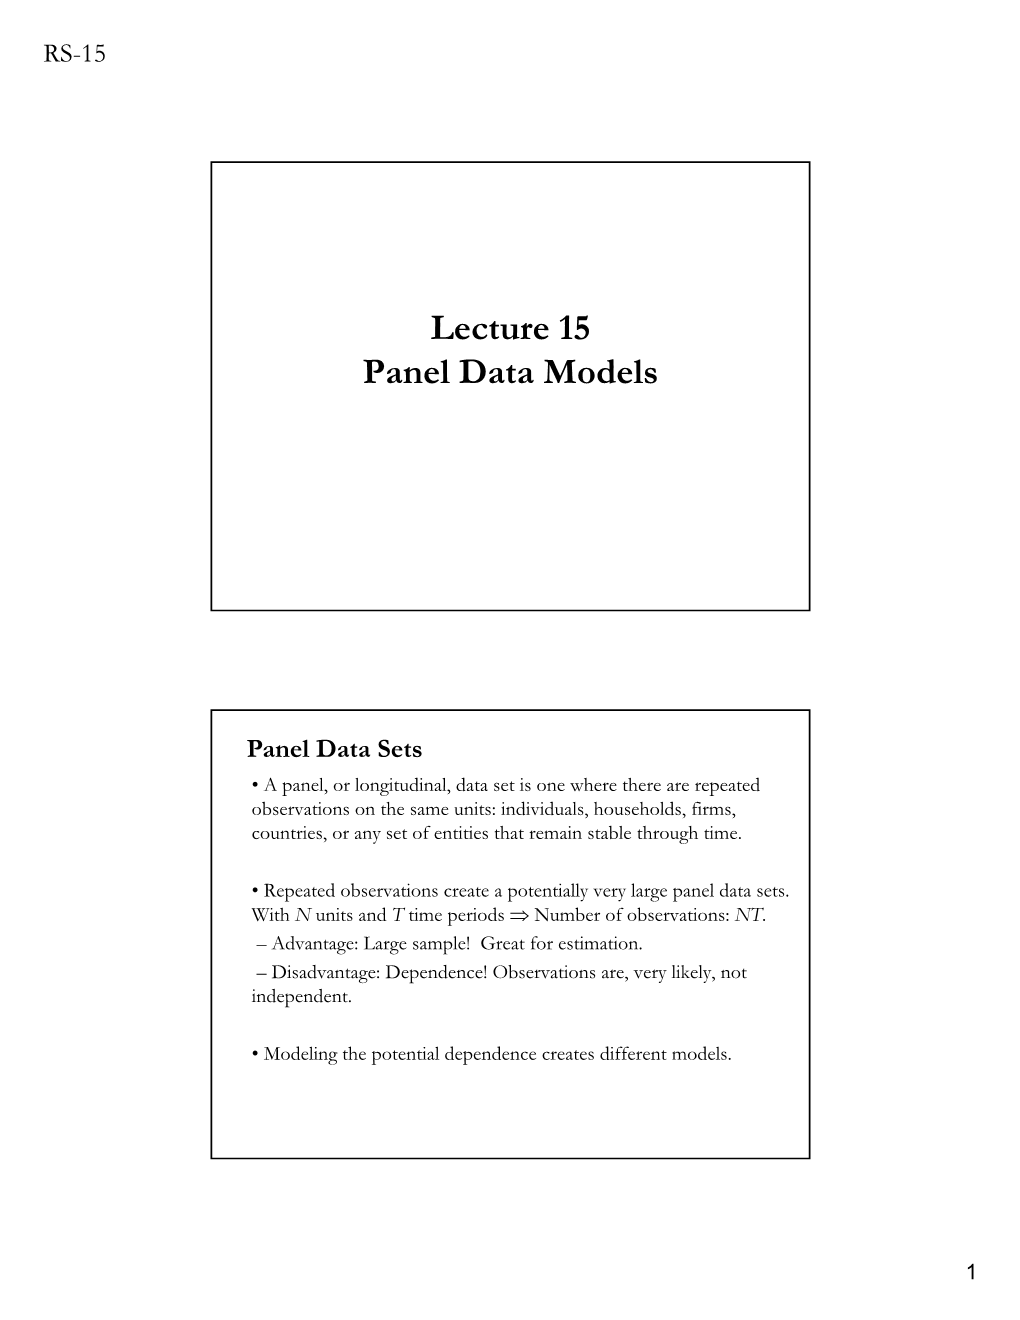 Lecture 15 Panel Data Models